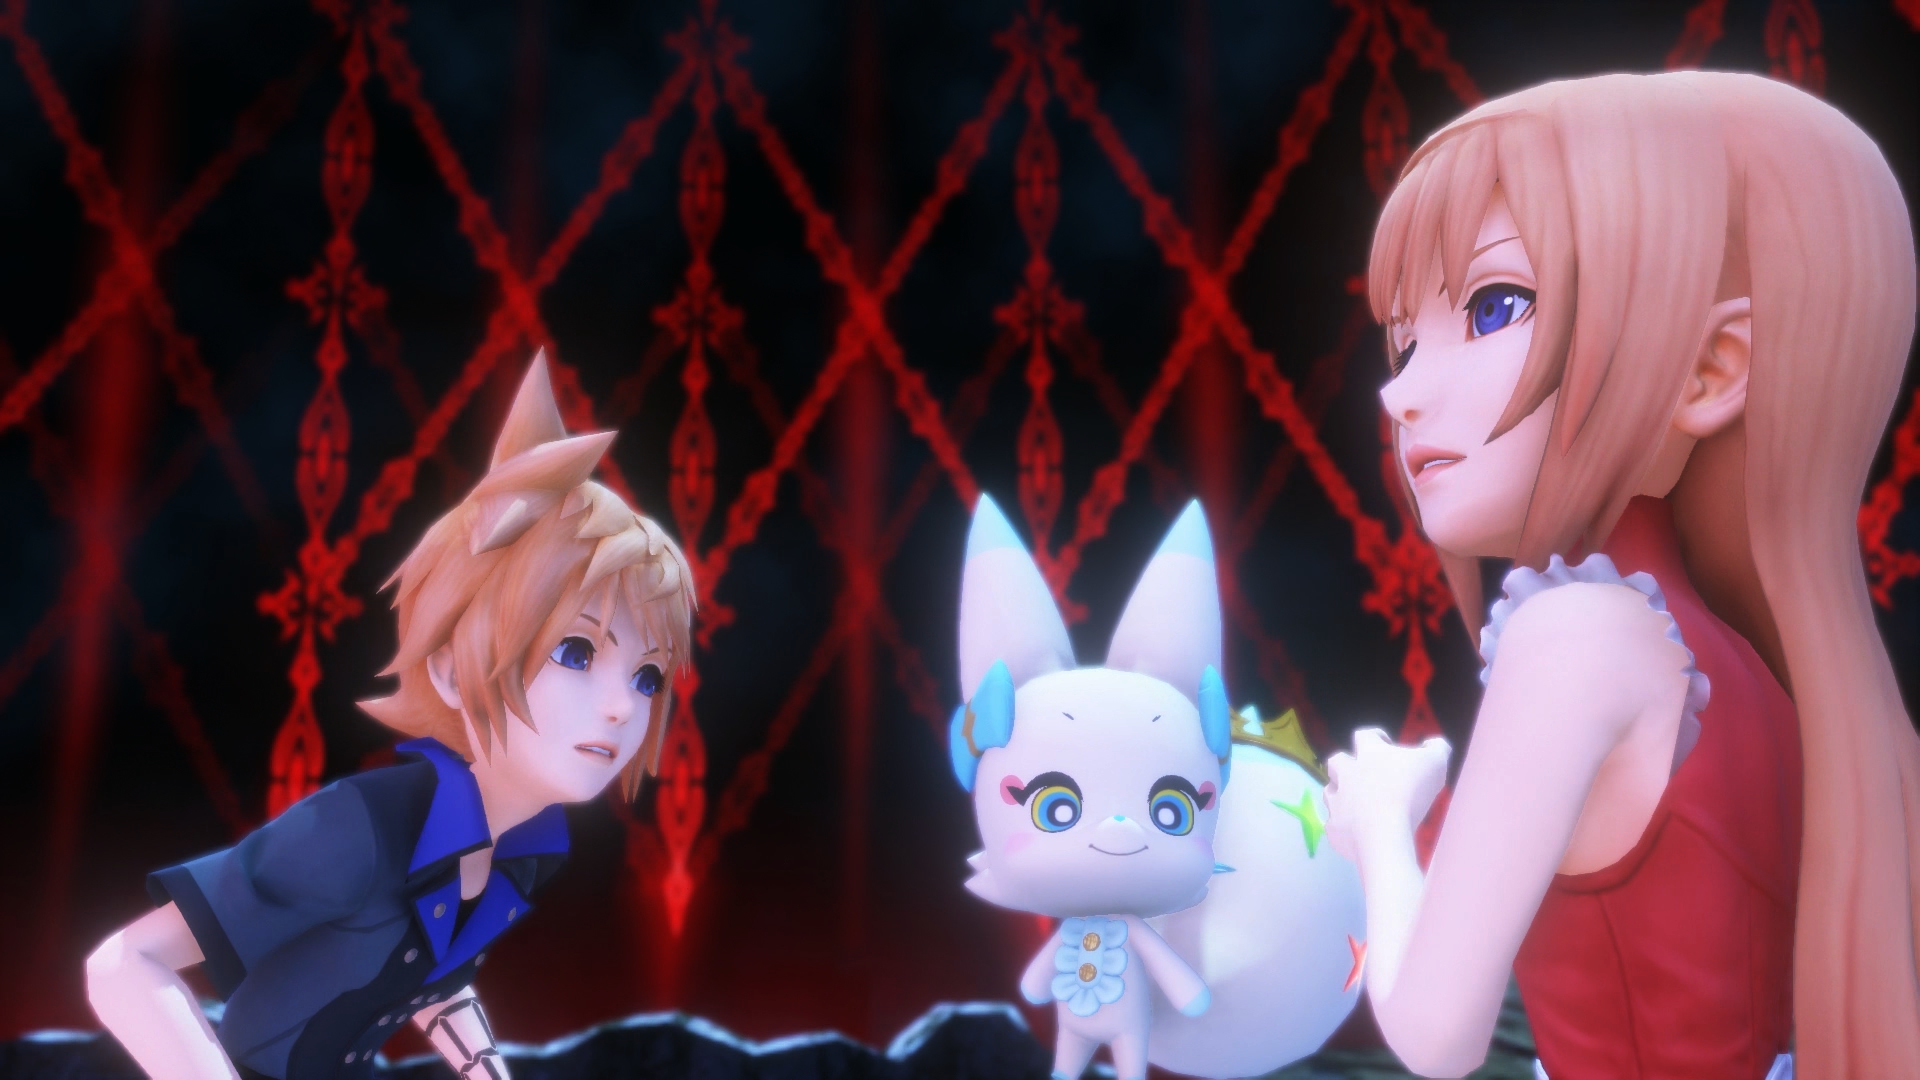 World of Final Fantasy PS4 and PS Vita differences outlined